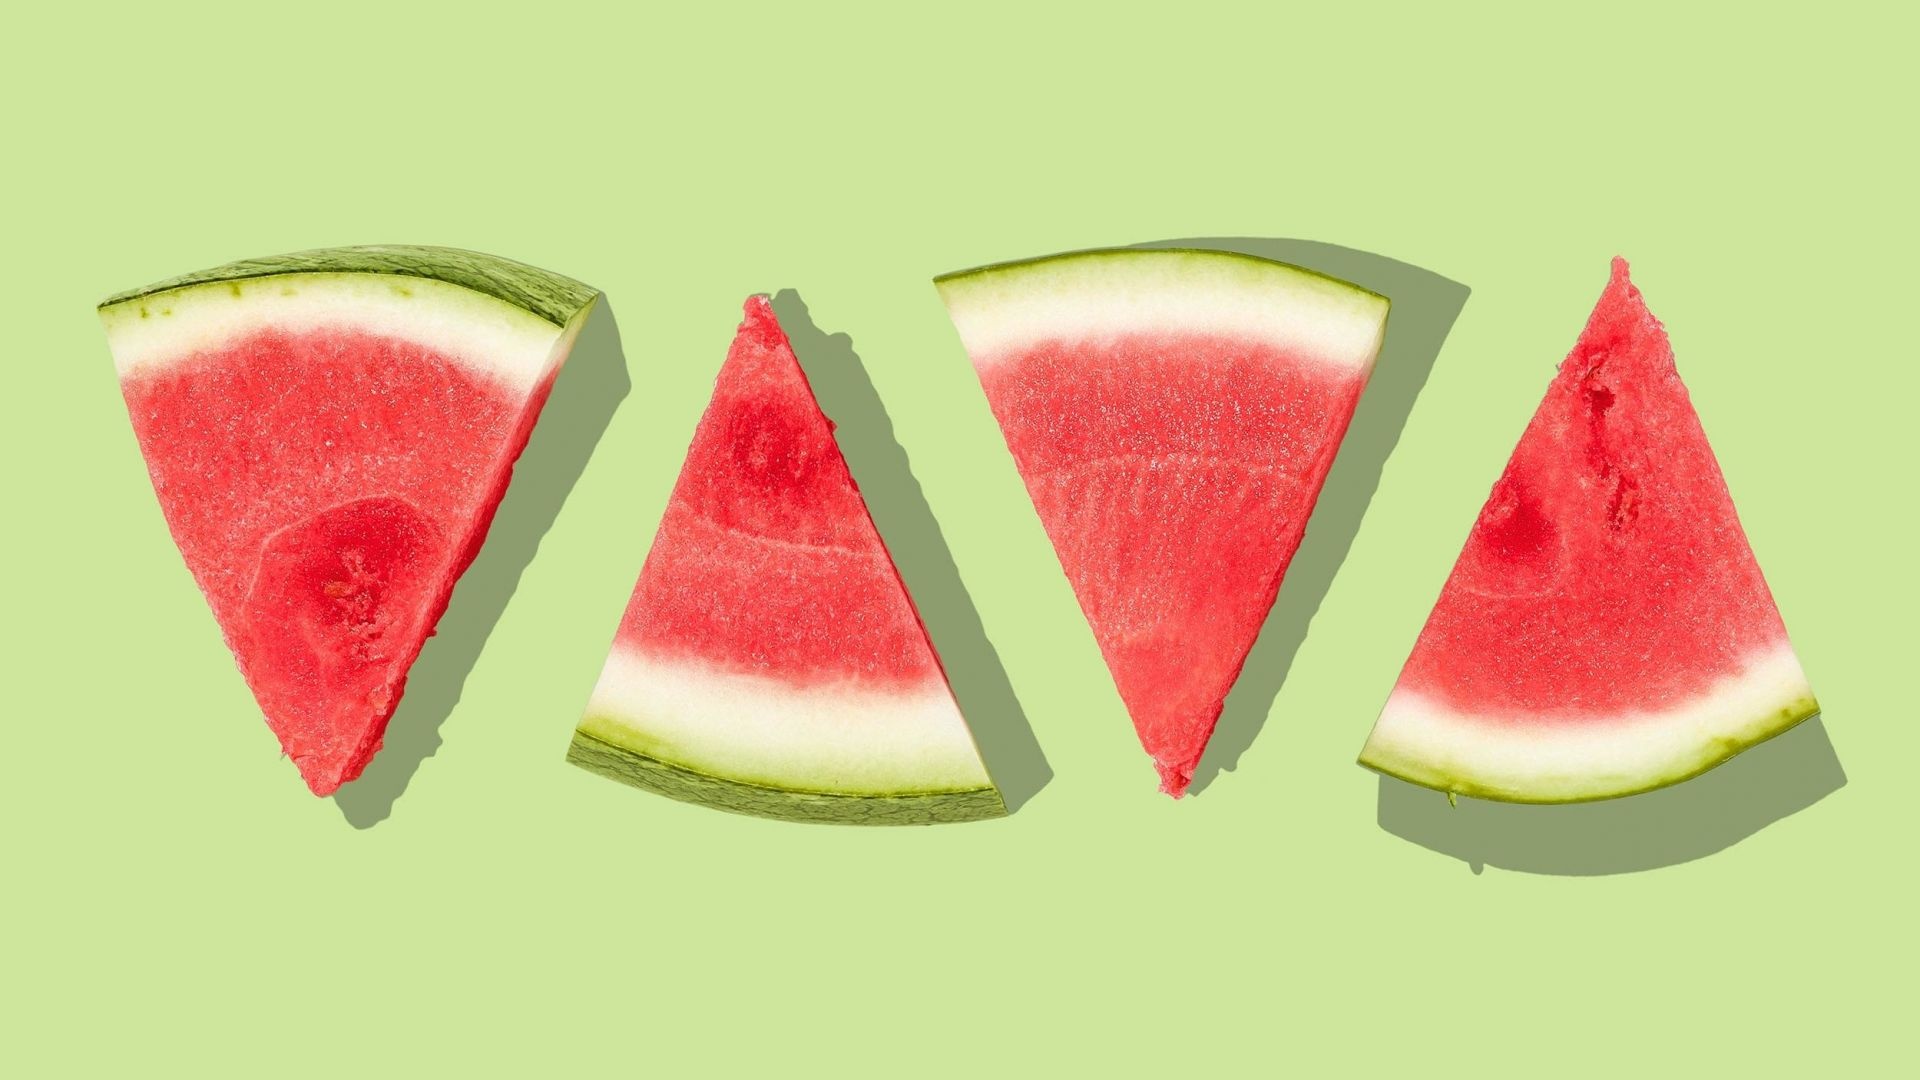 Watermelon: High in lycopene, a carotenoid with antioxidant and cardioprotective properties. 1920x1080 Full HD Background.